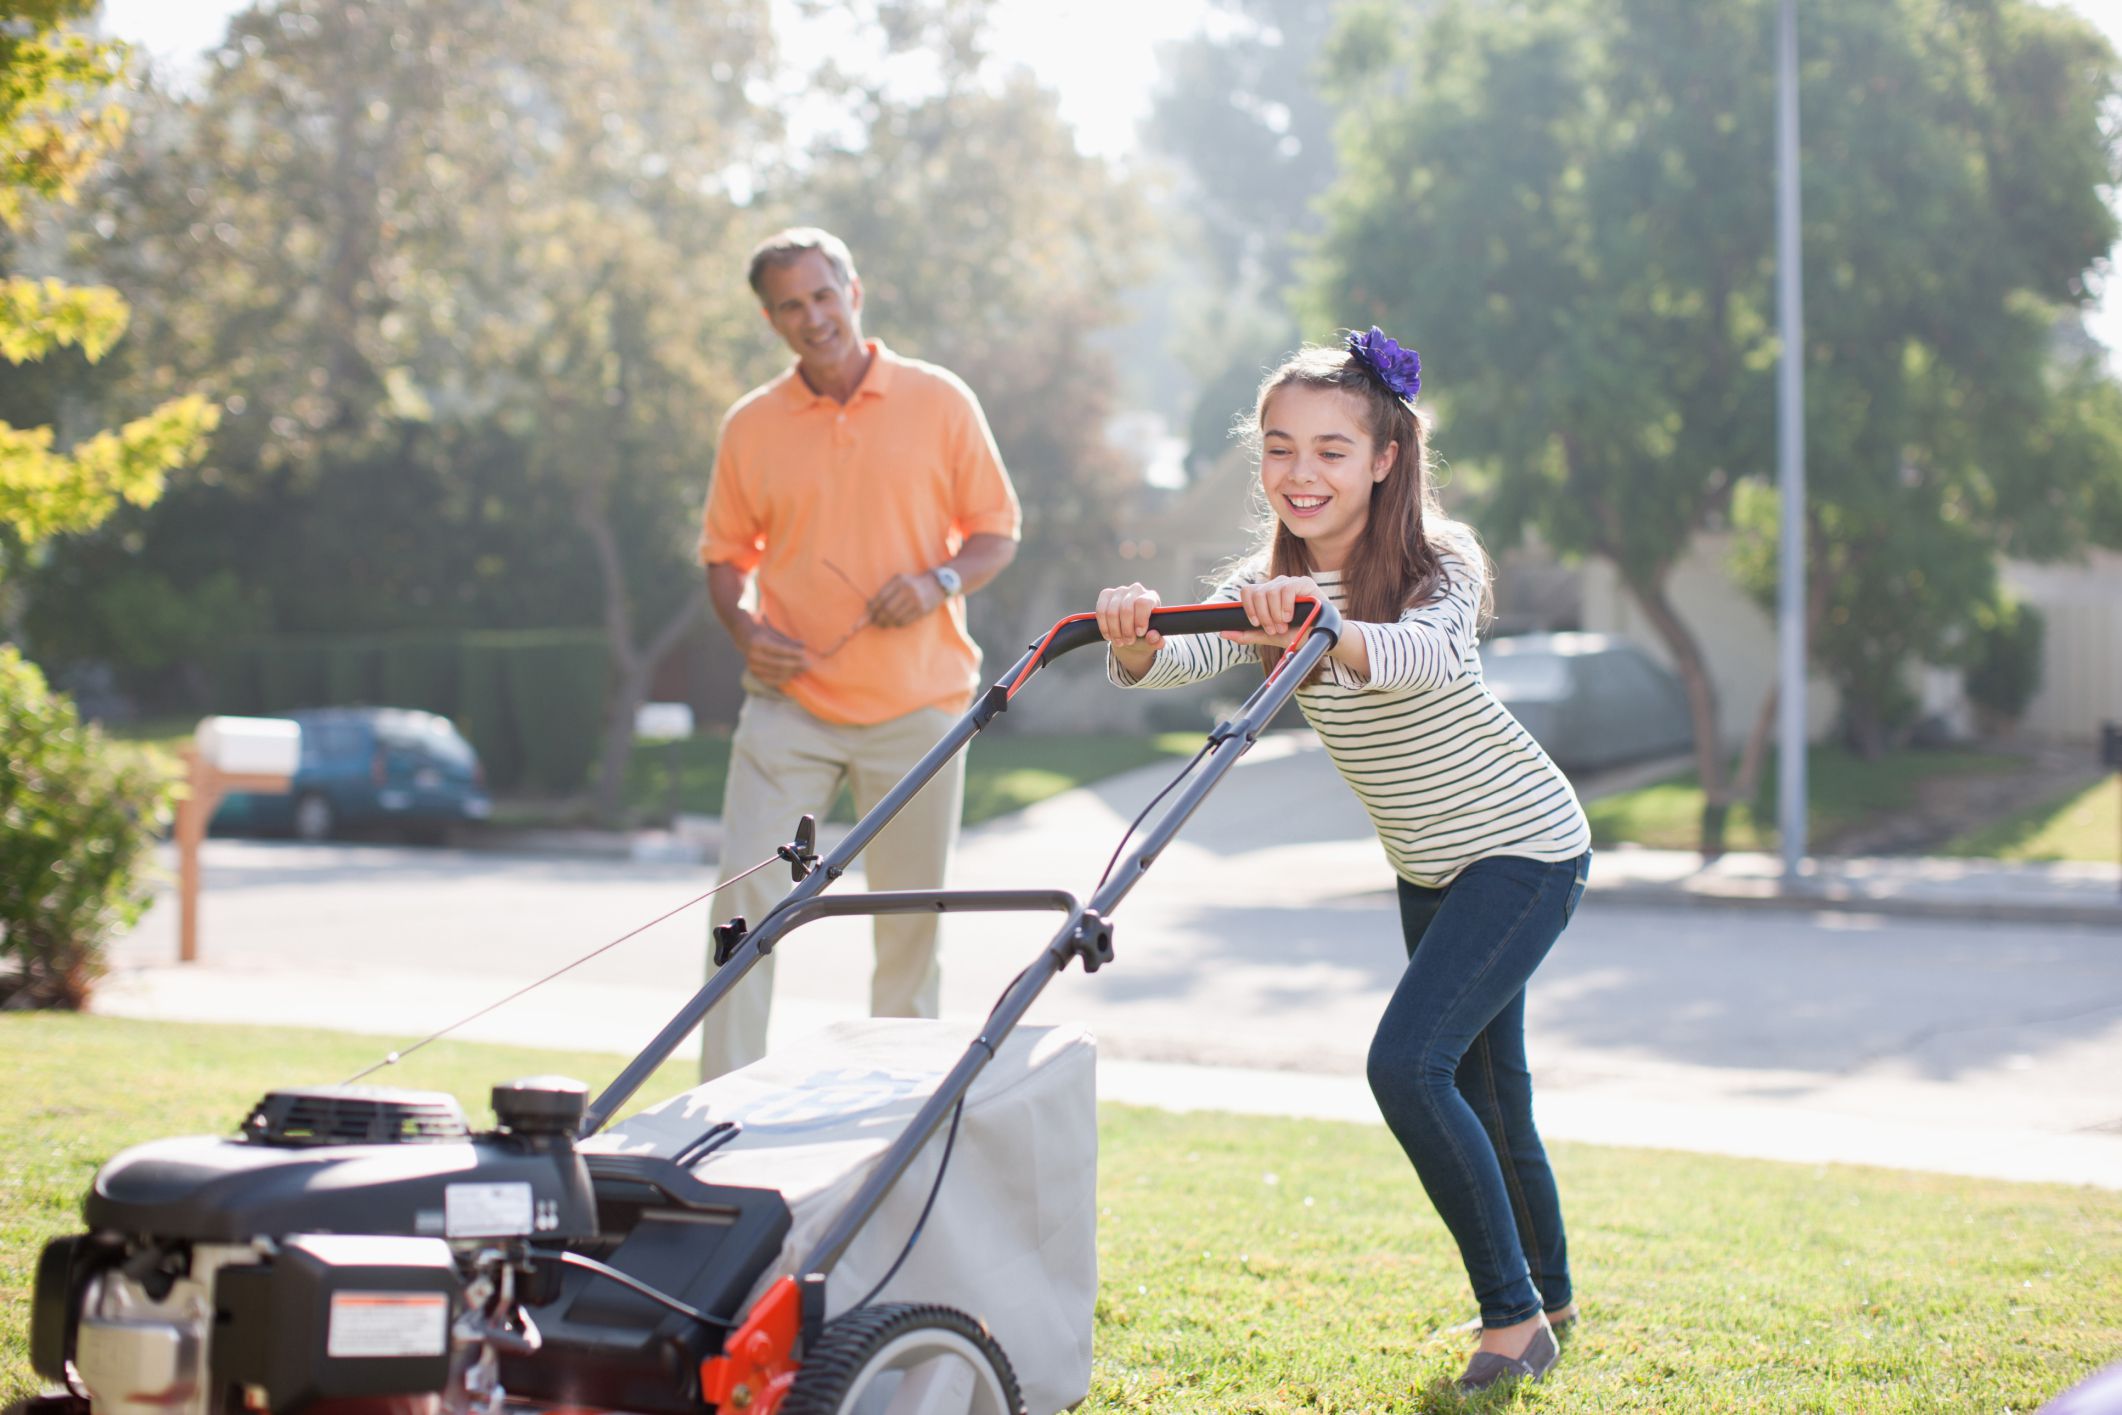 Little girl mowing lawn with assistence from her dad